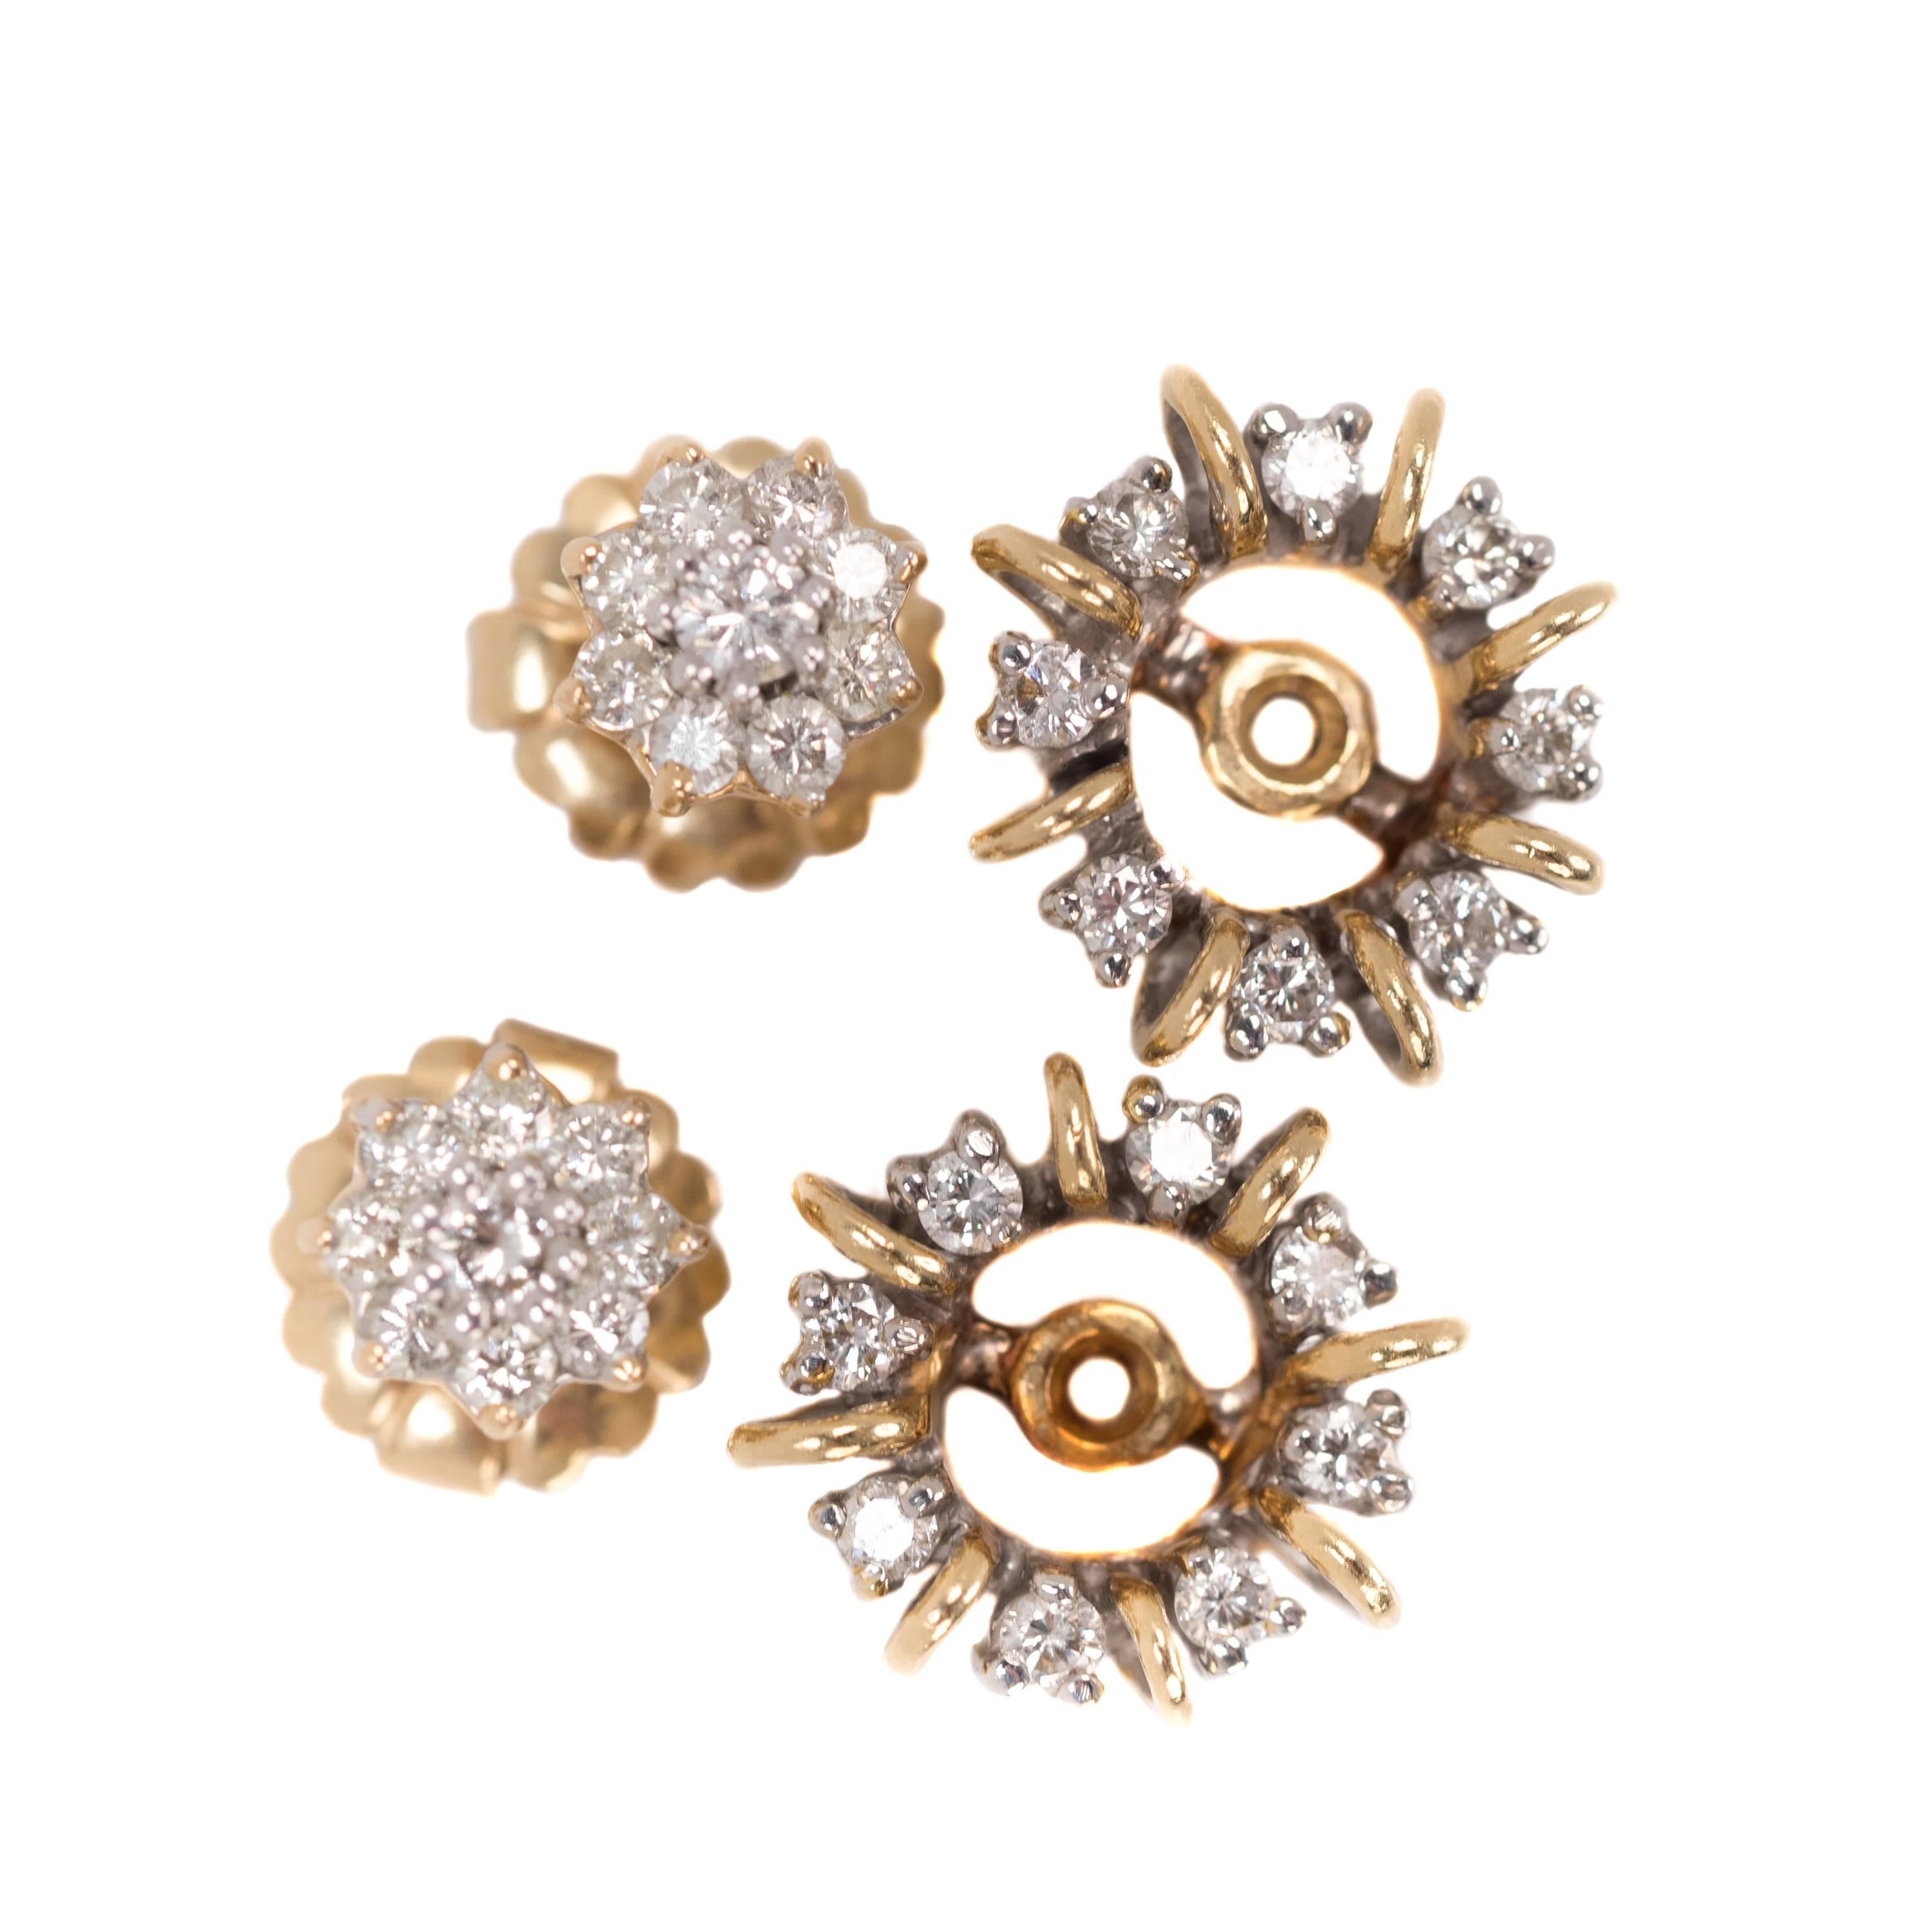 1950s Retro Diamond Earrings with Jacket - 14k White Gold, Yellow Gold, Diamonds

Feature Diamond cluster earrings with Diamond halo jackets. Each floral motif earring has a center diamond surrounded by a halo of 8 diamonds. The center diamond is